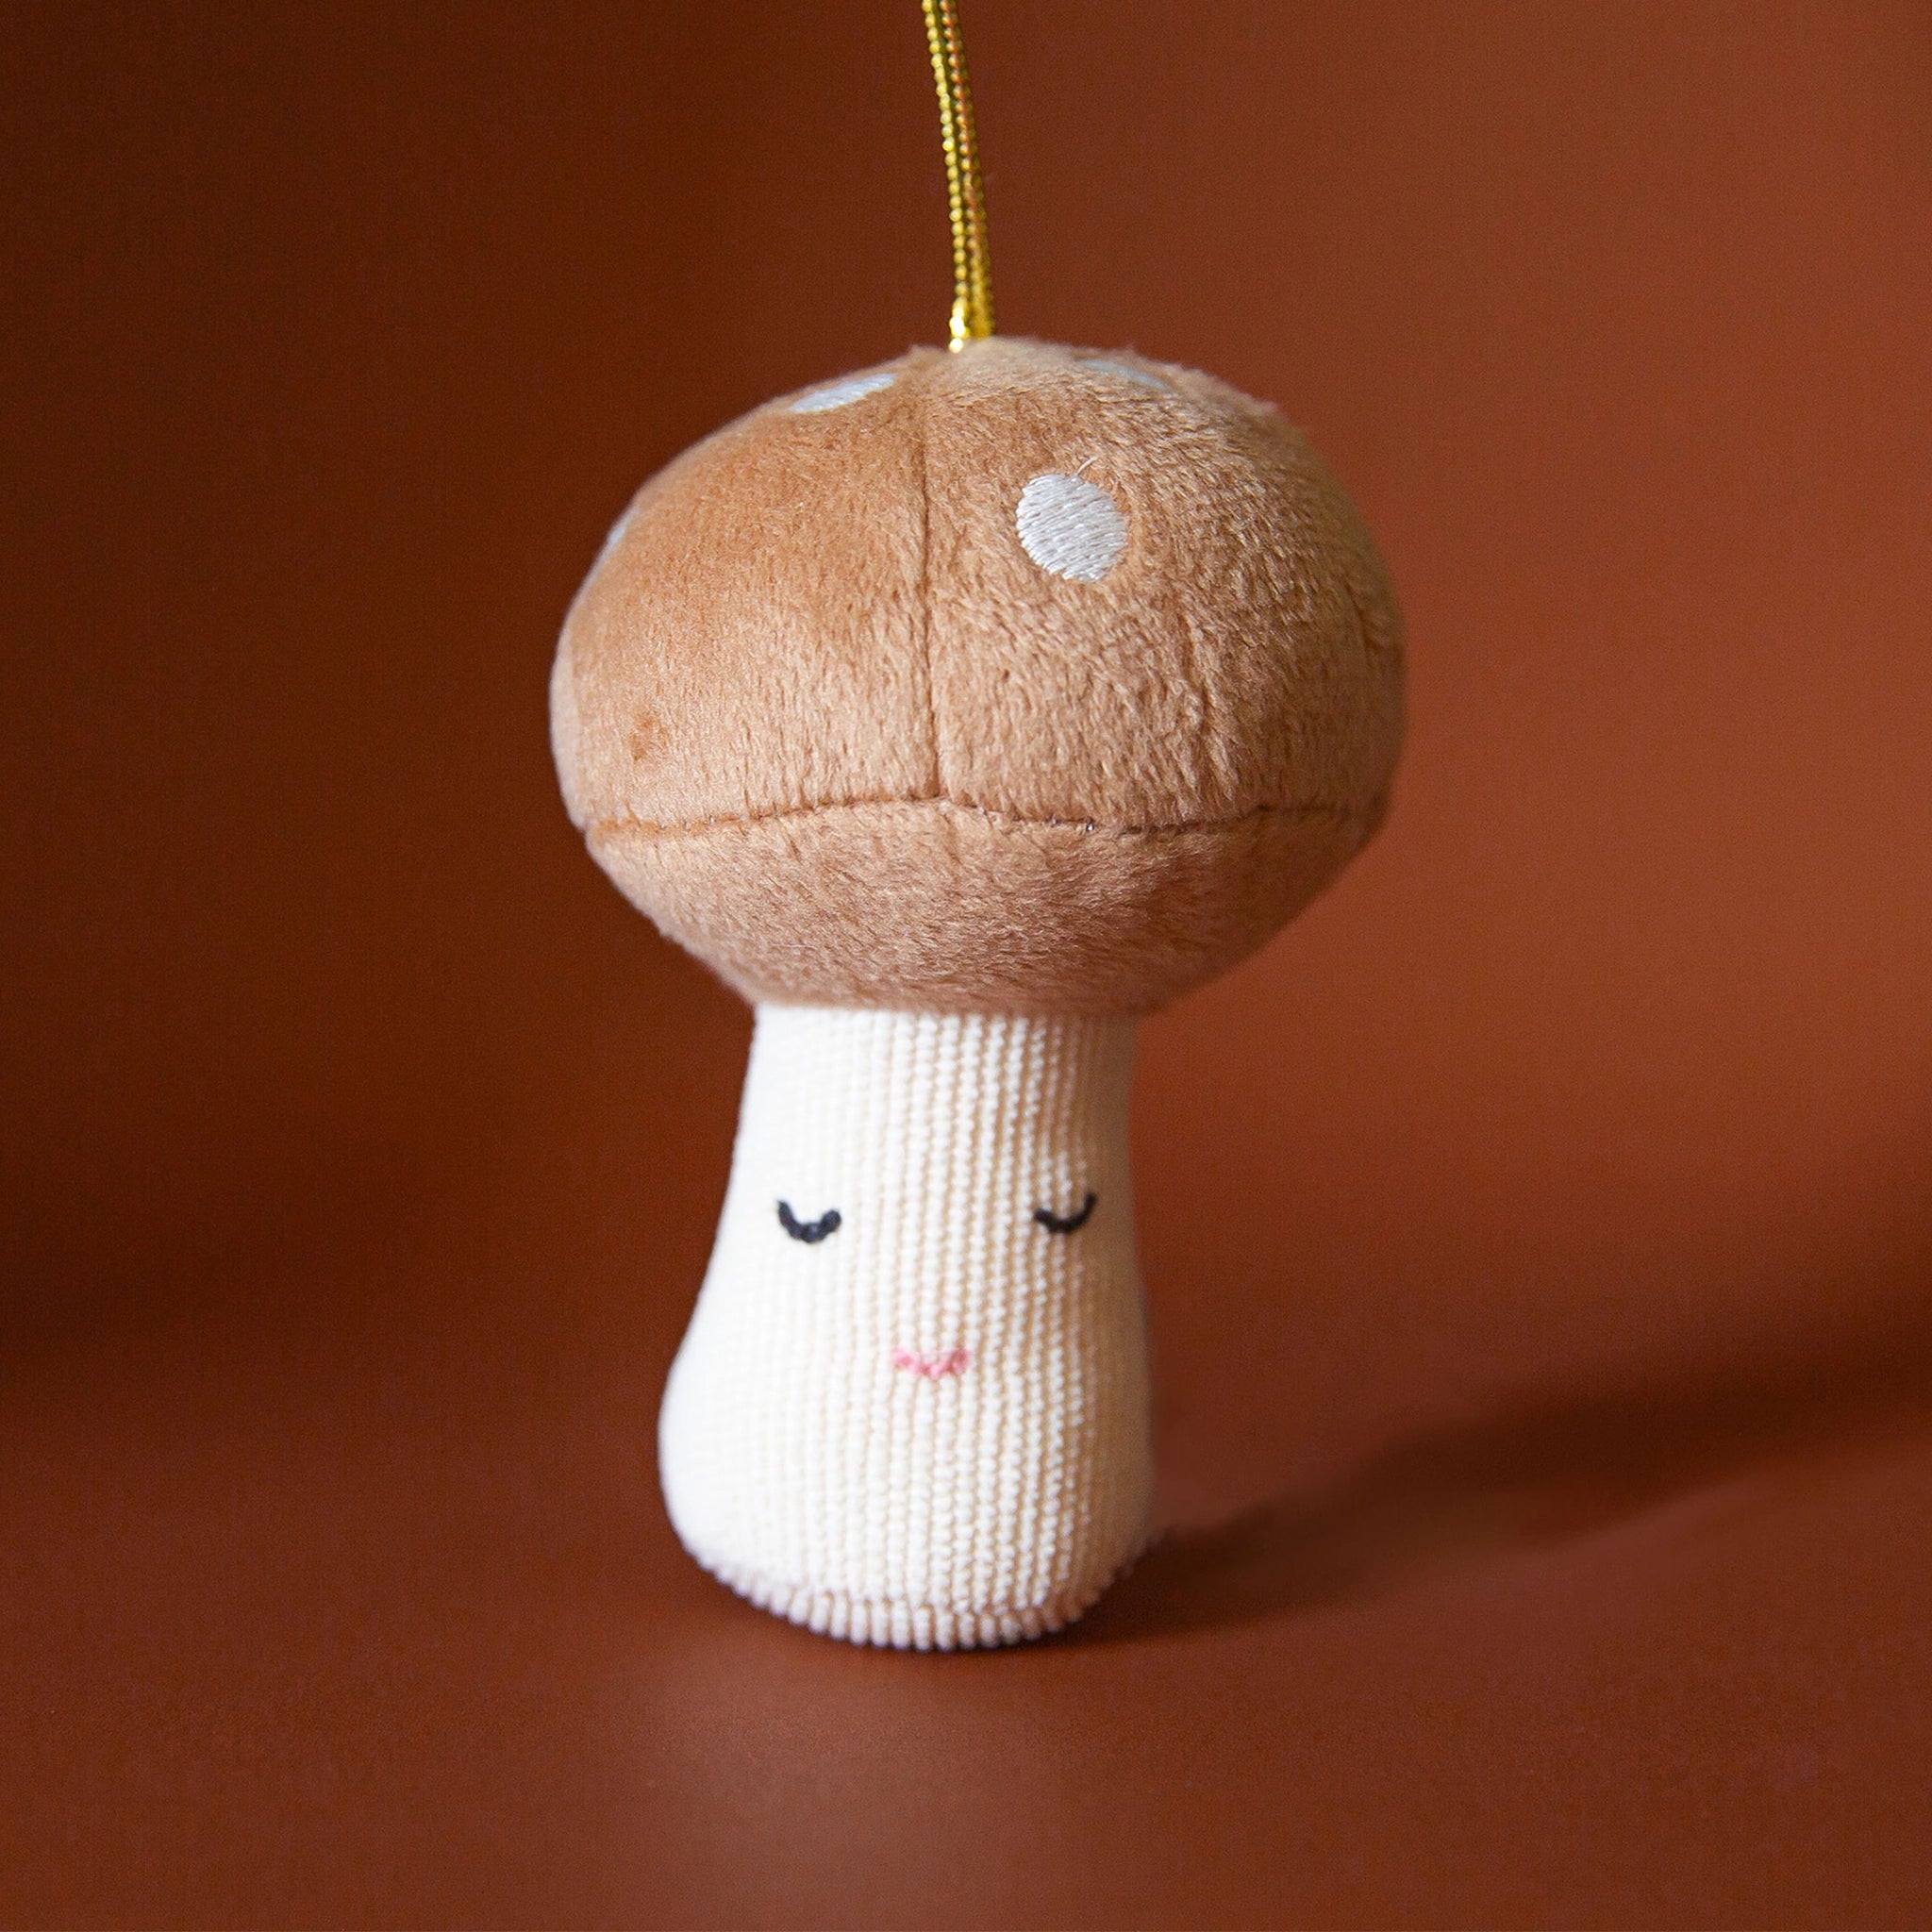 On a burnt orange background is a tan and cream mushroom ornament with an adorable expression.